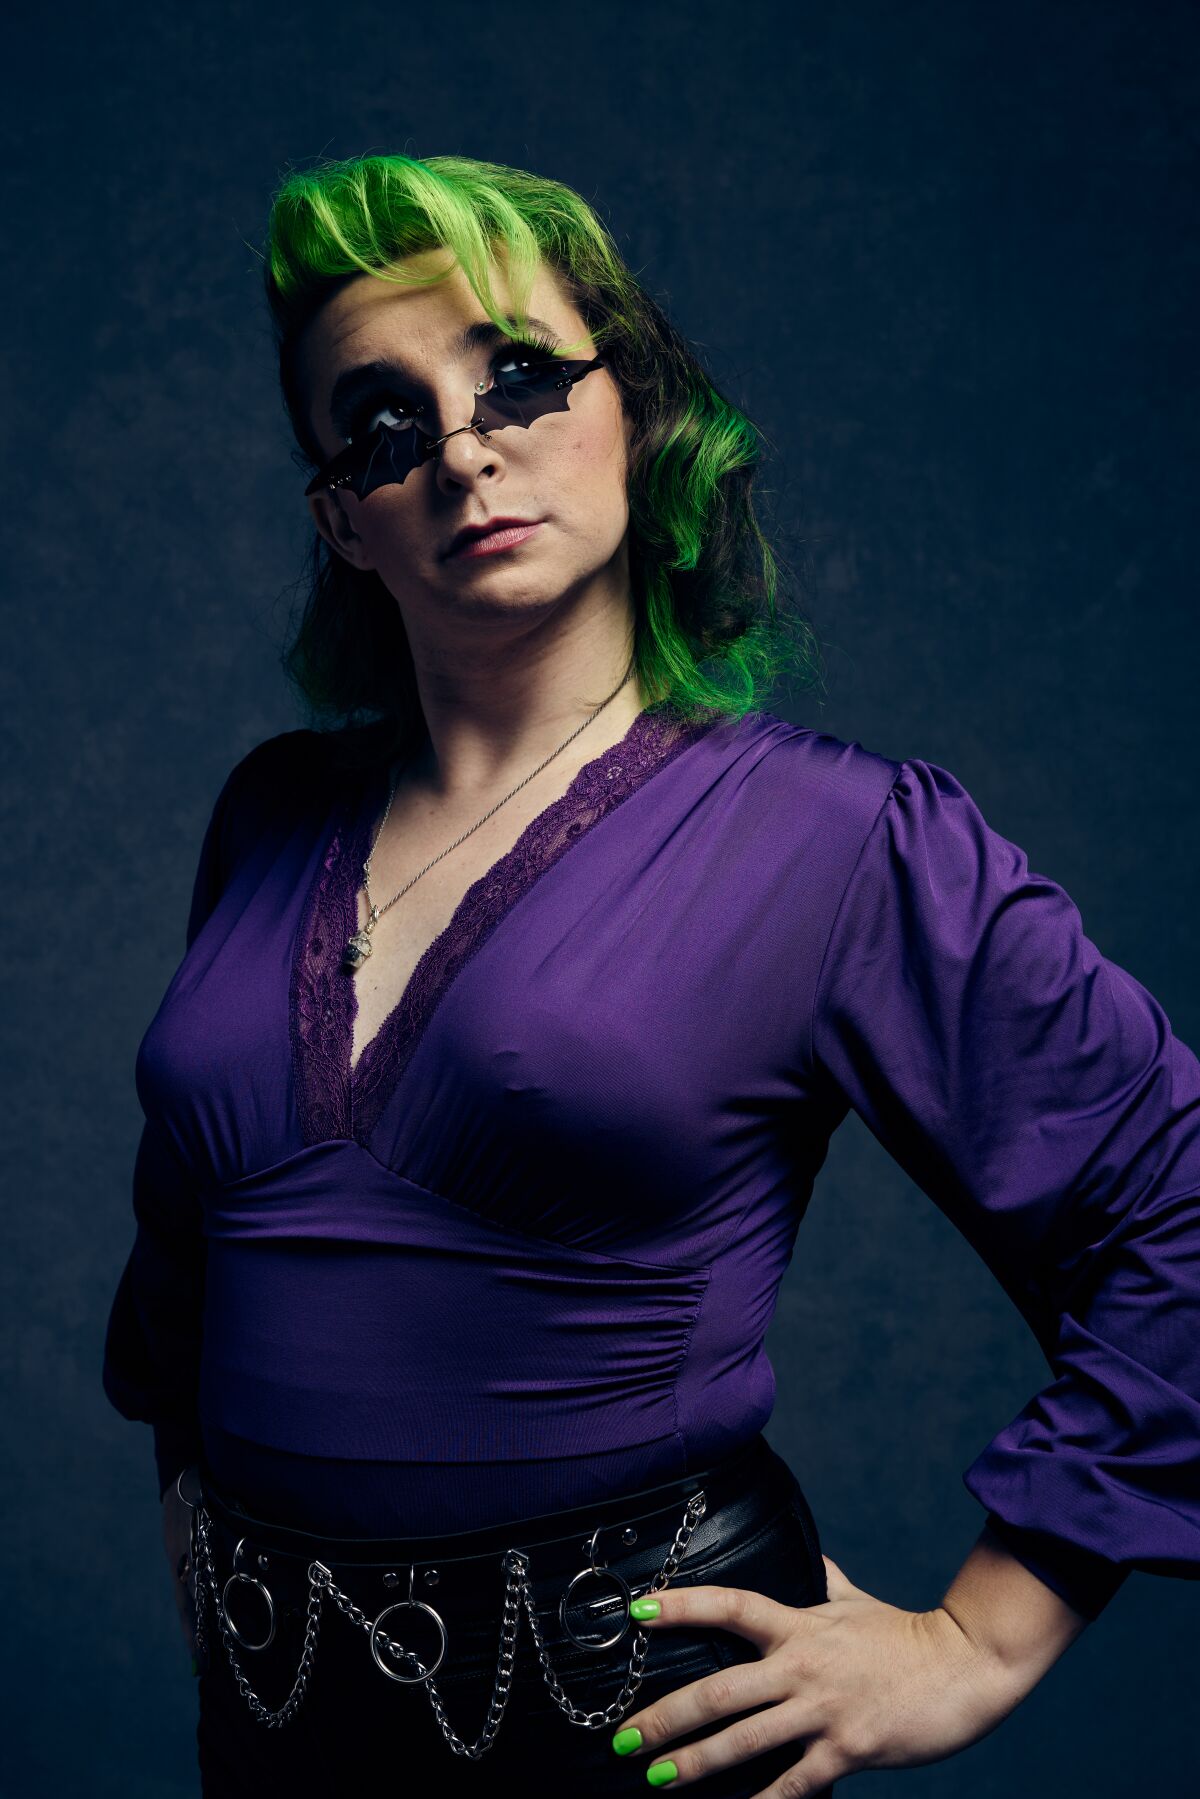 a woman in a purple silk top and green hair puts her hands on her hips and poses